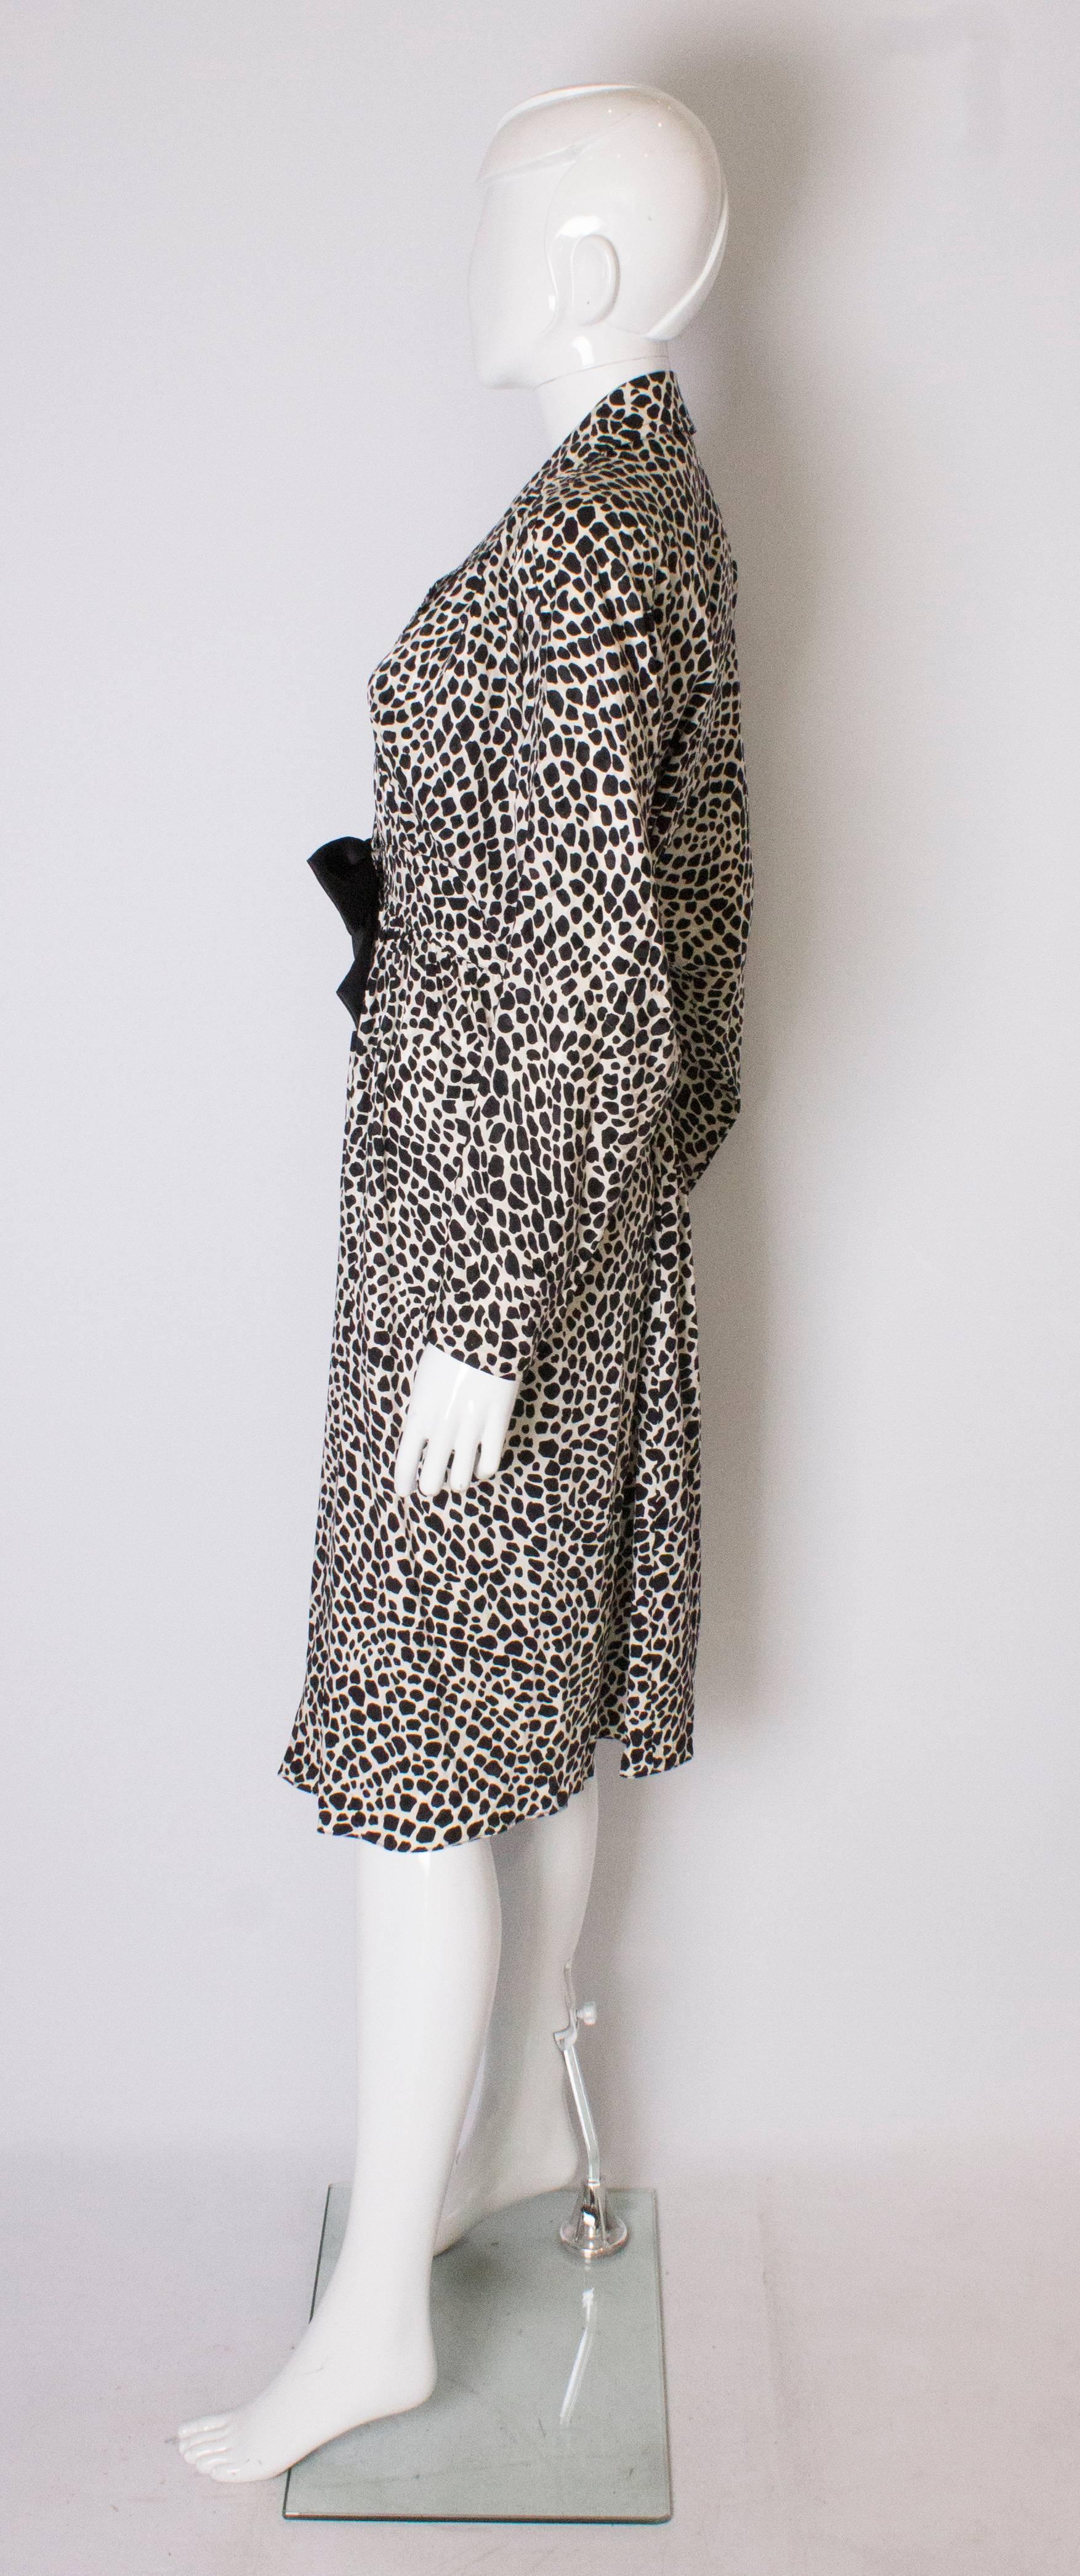 A Vintage 1980s Black and White printed Dress with bow detail by Adele Simpson 1